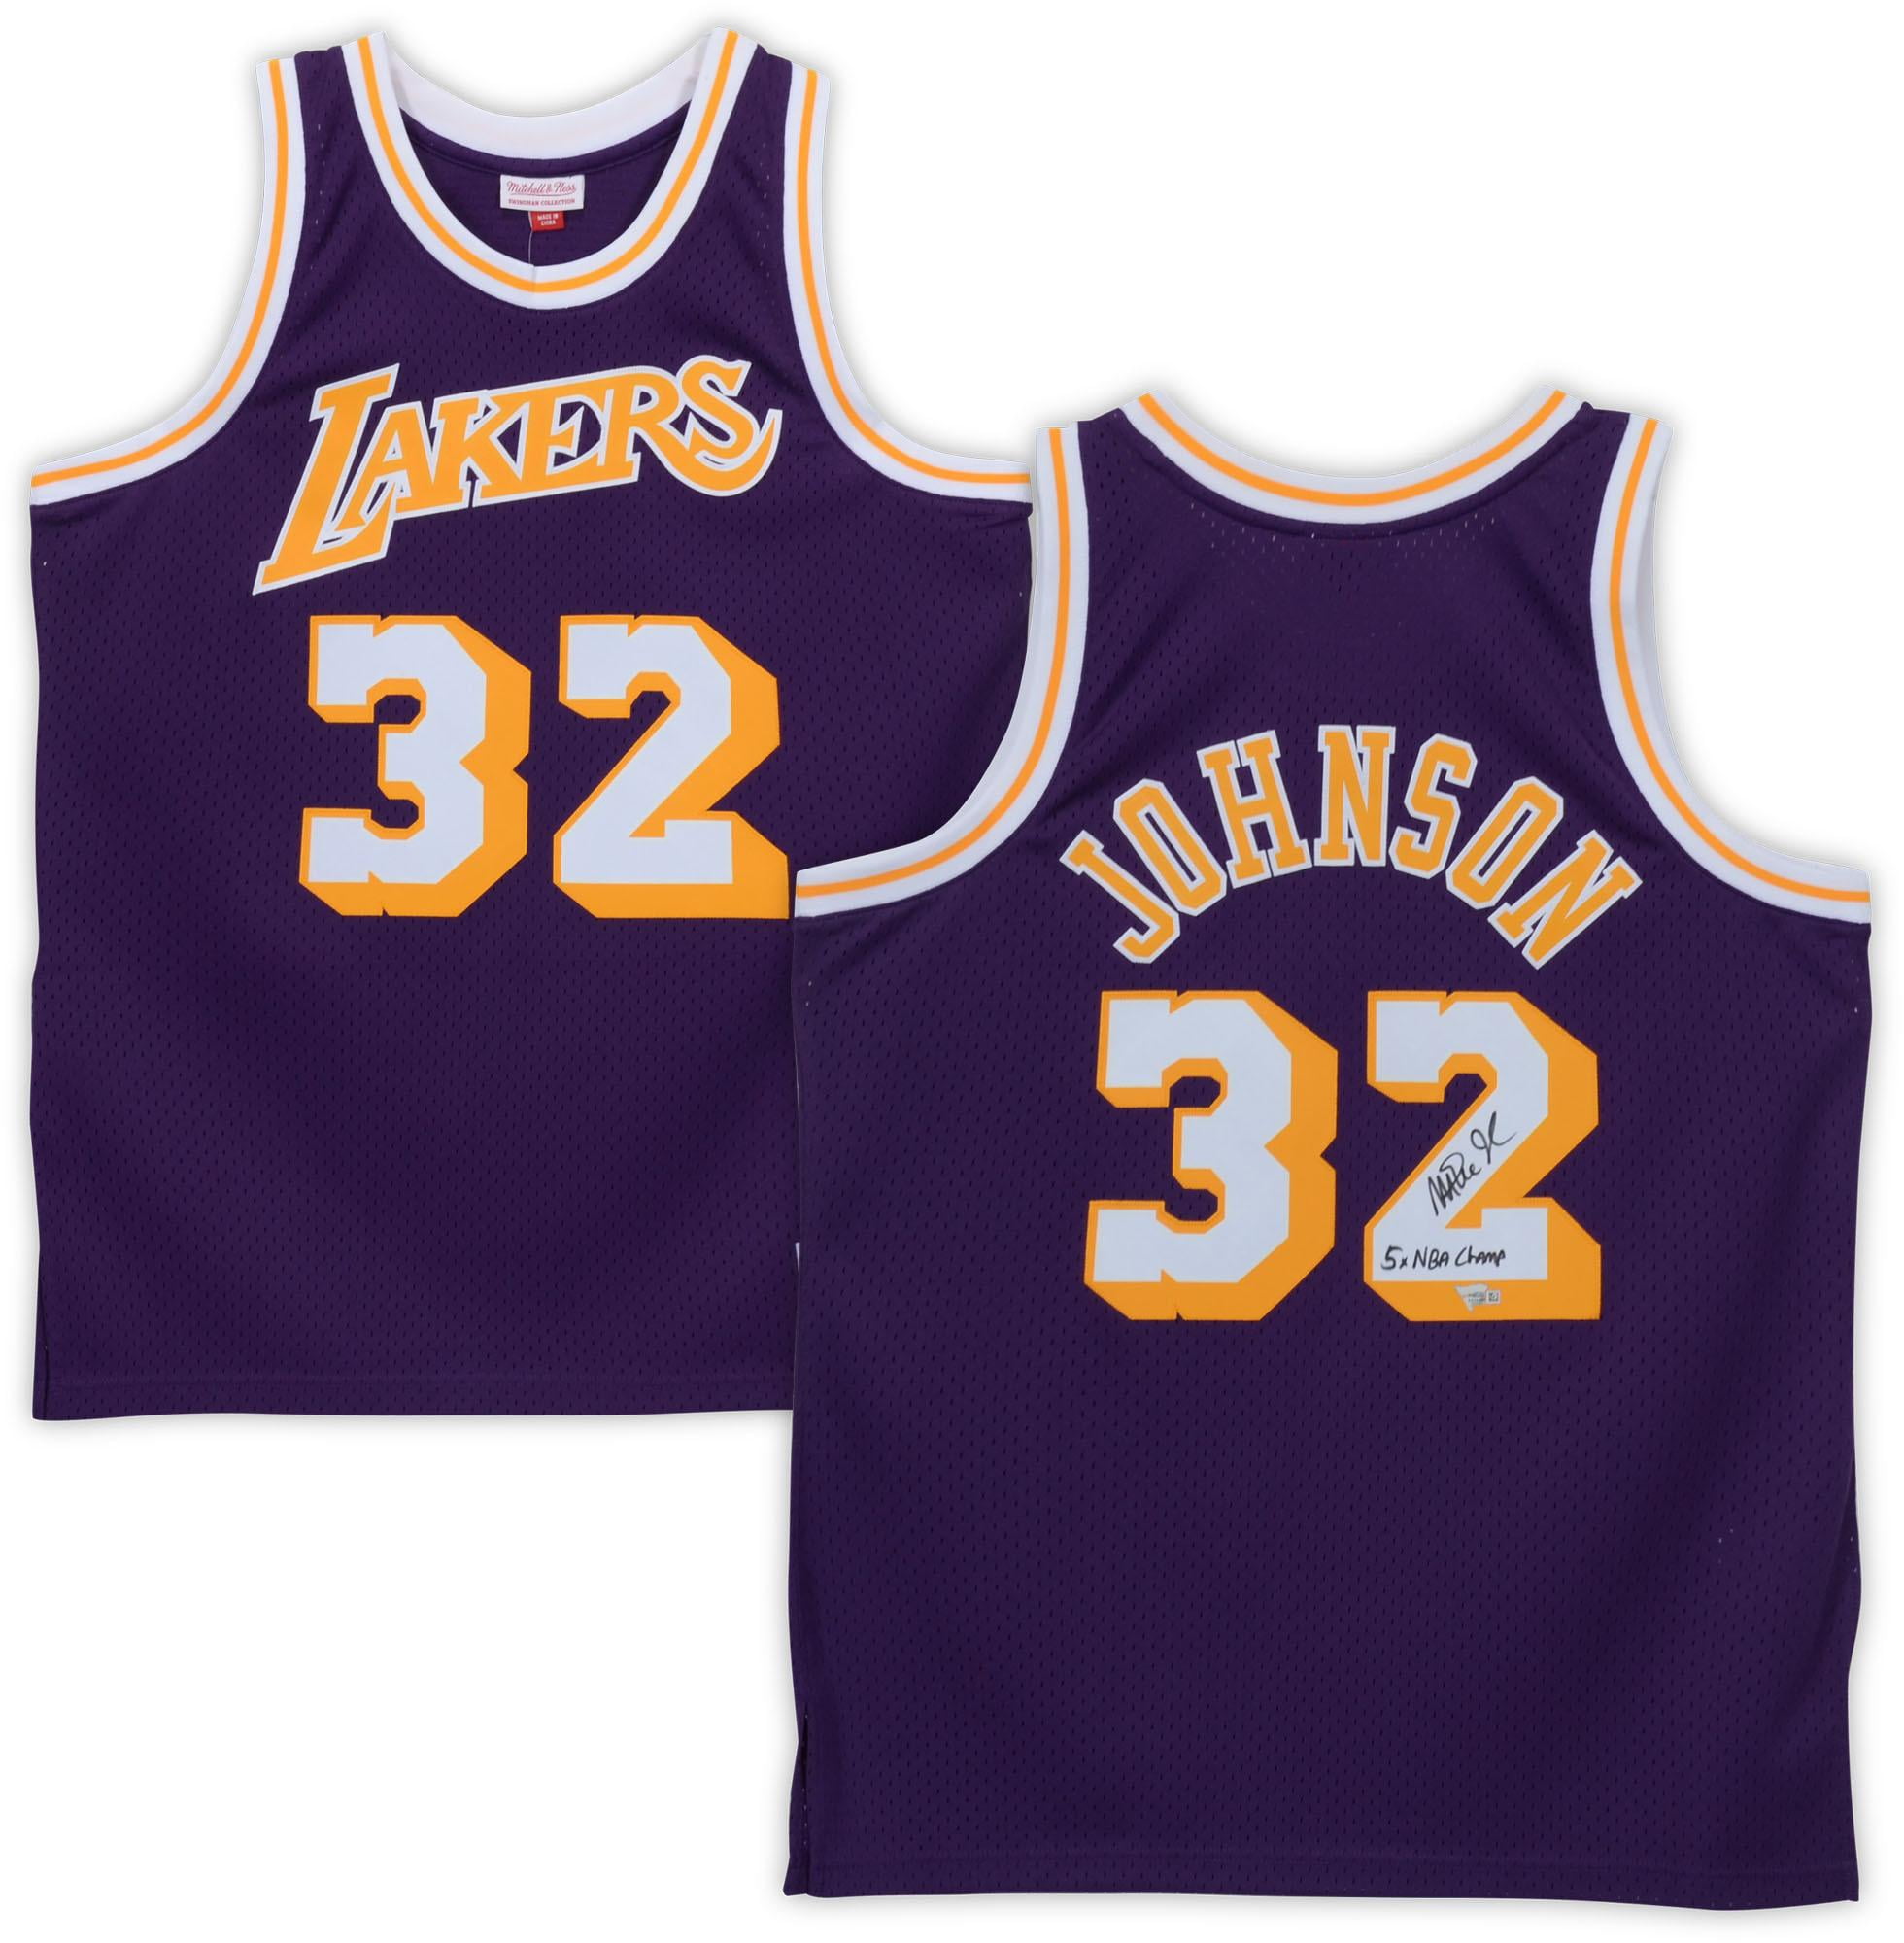 5x lakers jersey